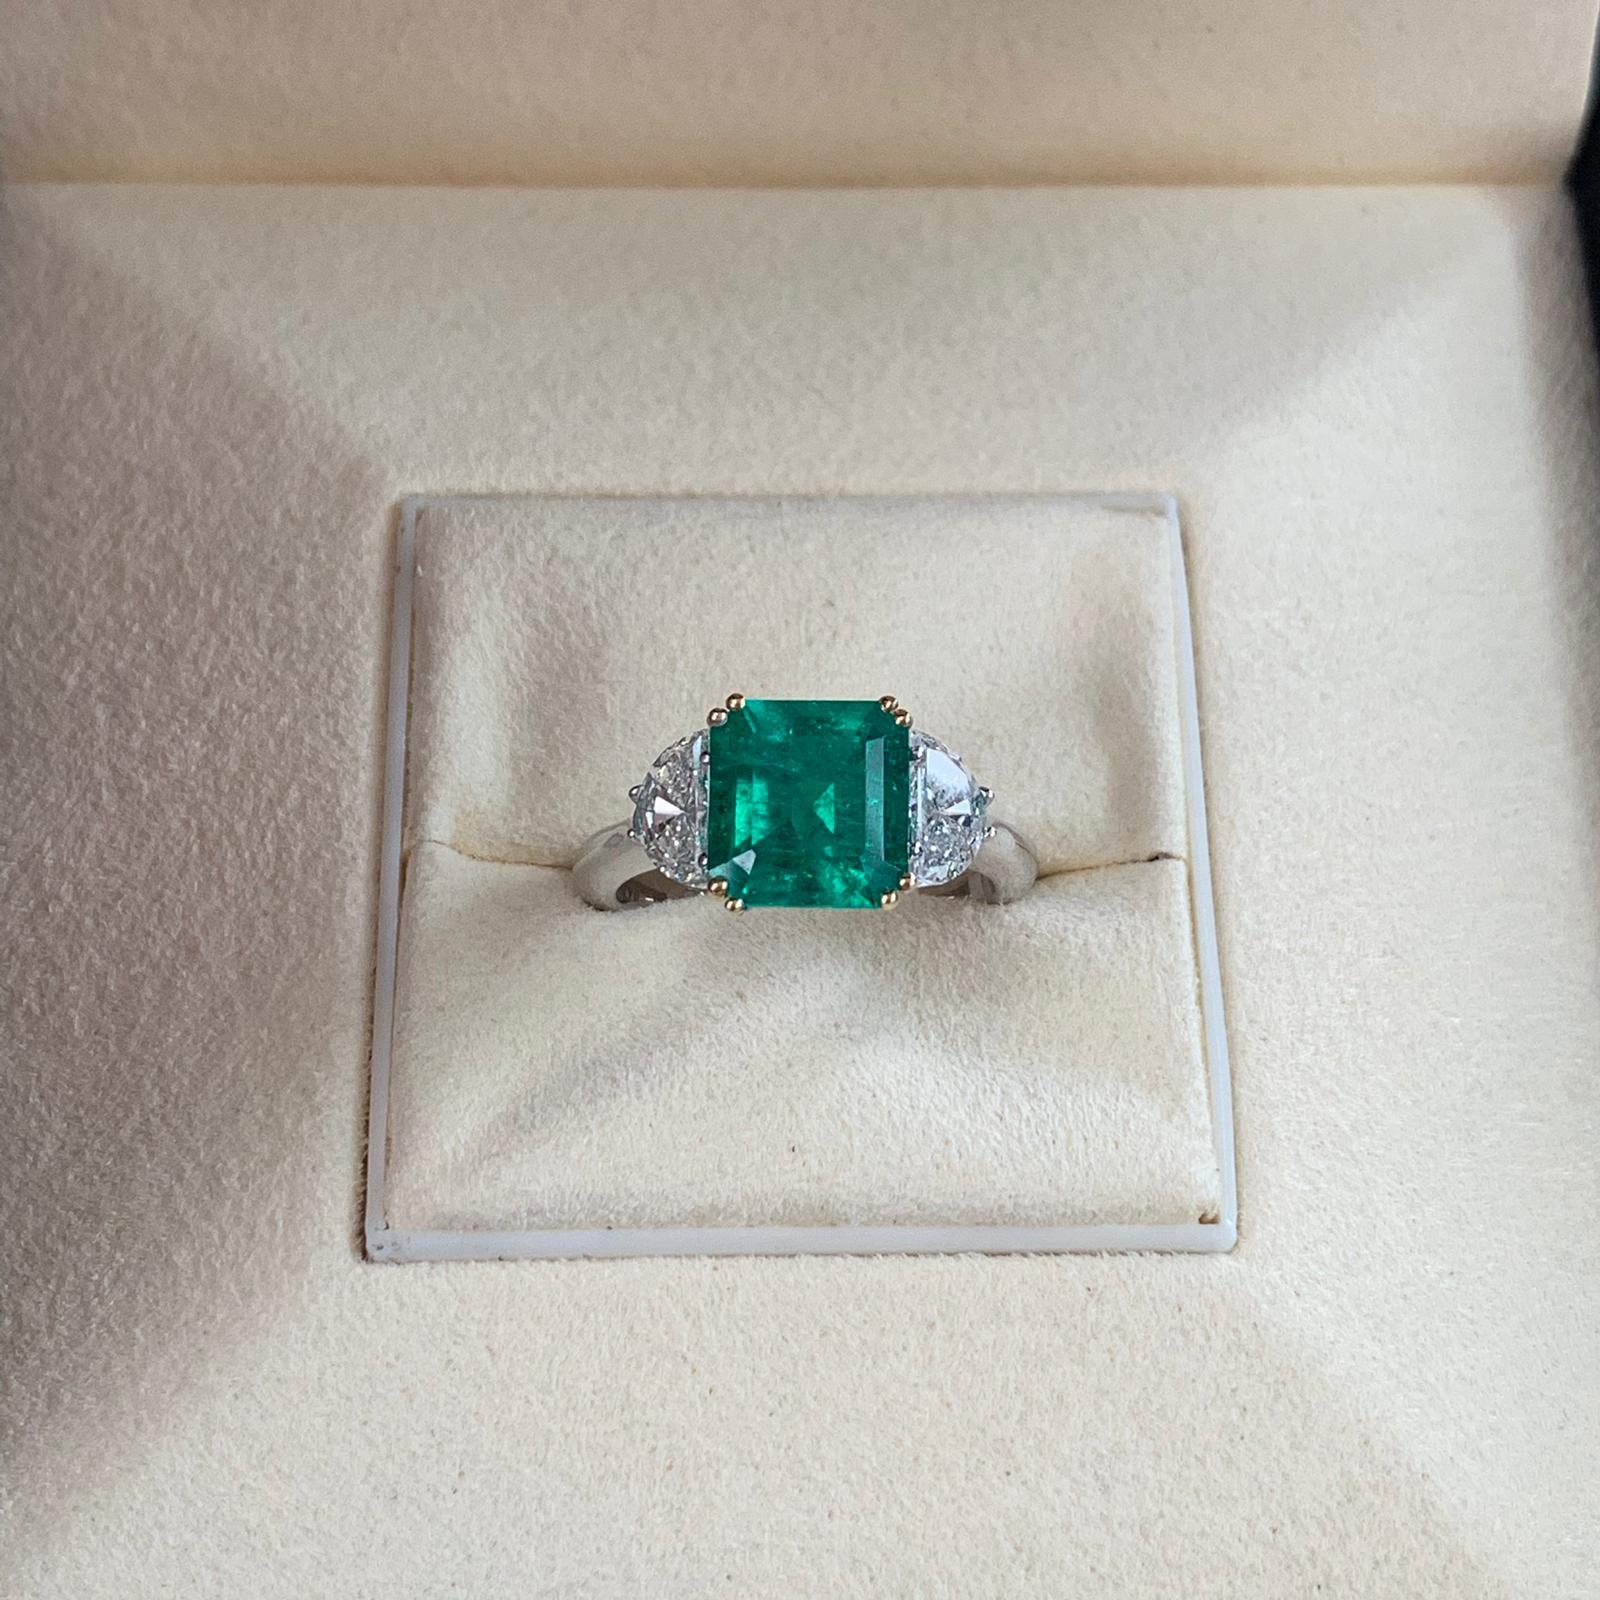 Beautiful 2.83 carats of Colombian Emerald, surrounded by 2 white trillion cut diamond 0.86 total carats. Set on 4 prong 18k white gold.